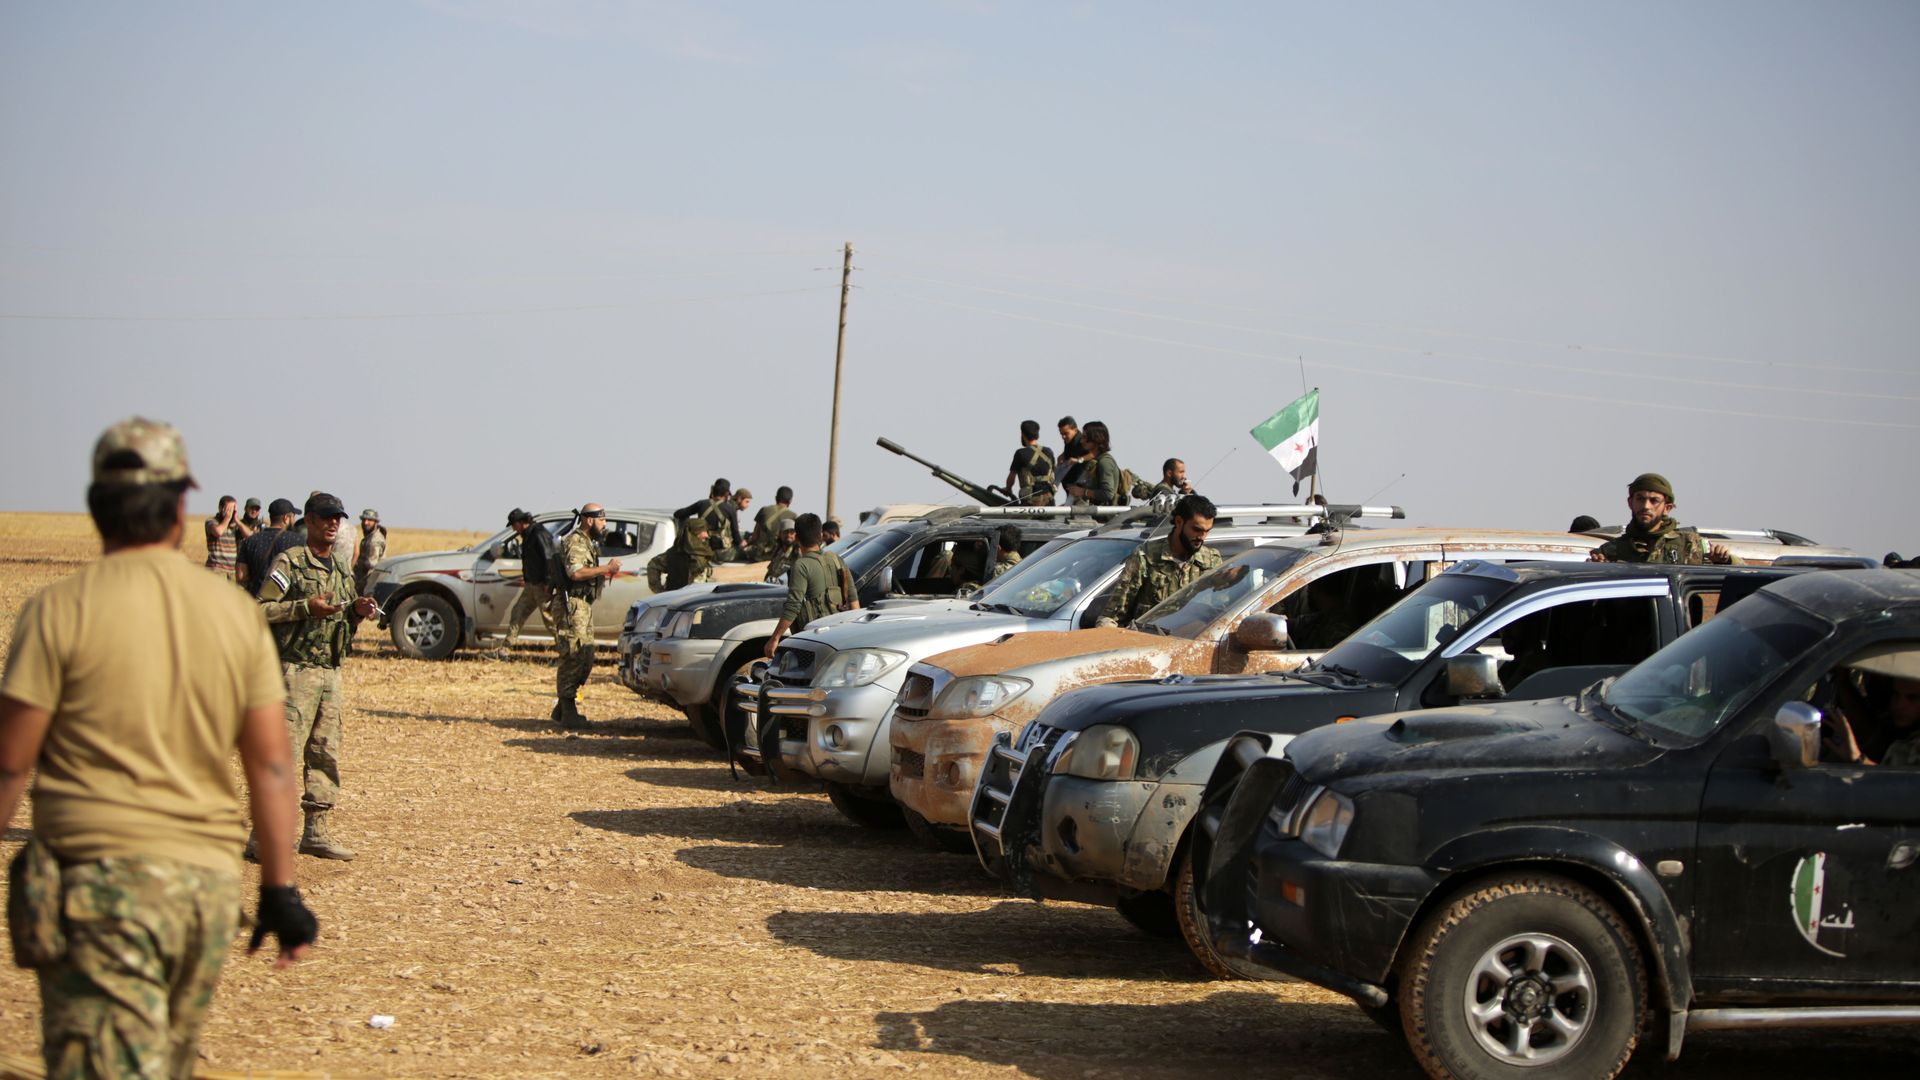 fighters in and around a small fleet of cars and trucks